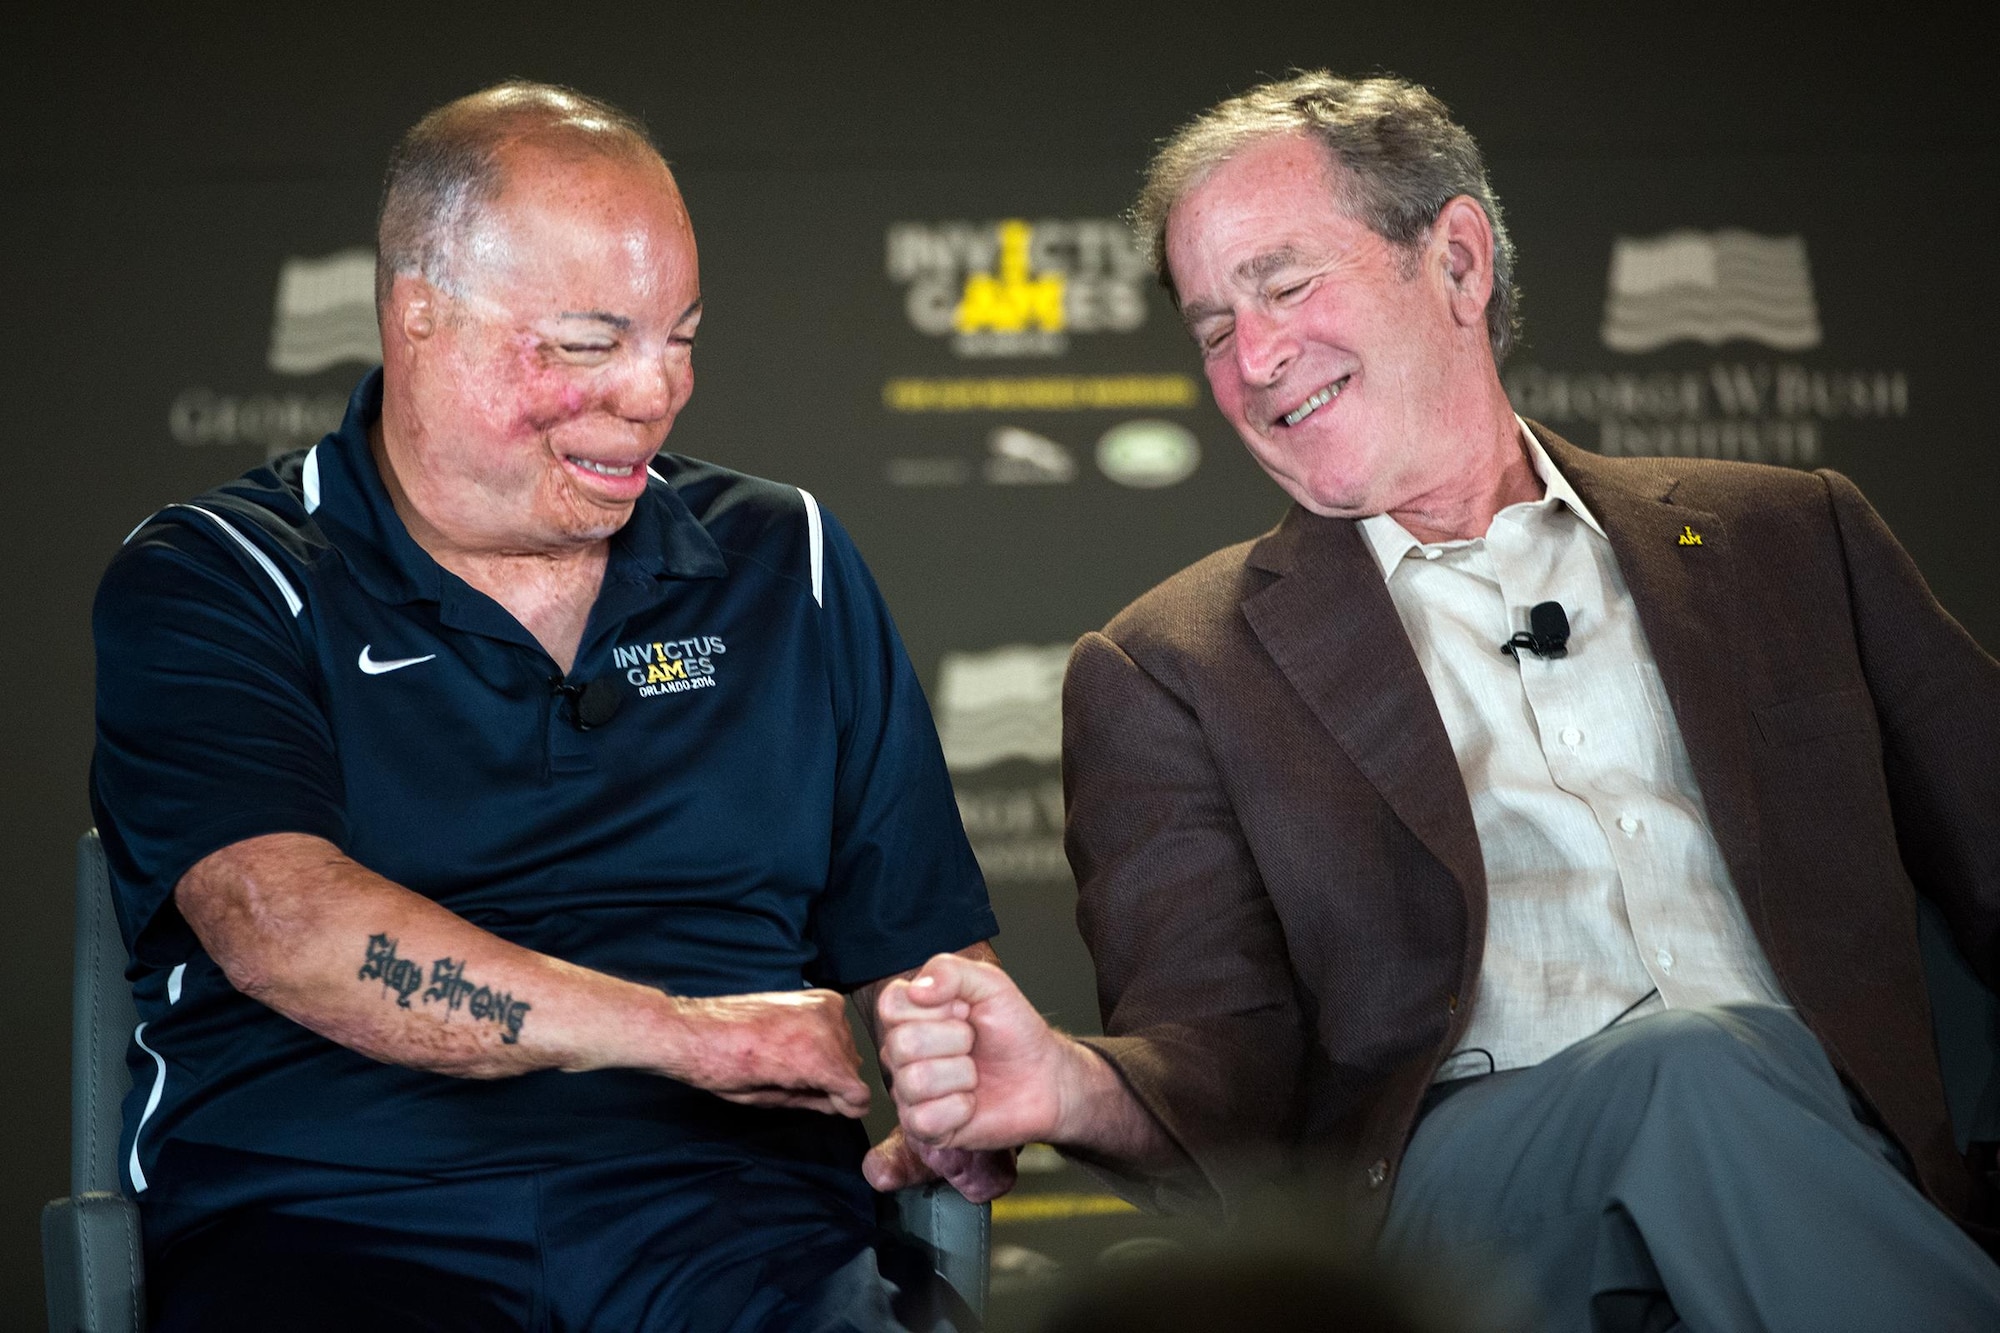 Former President George W. Bush fist bumps with Air Force Master Sgt. Israel Del Toro during the 2016 Invictus Games Symposium on Invisible Wounds in Orlando, Fla., May 8, 2016. The symposium, hosted by Bush and Britain’s Prince Harry, sought to destigmatize the victims of post-traumatic stress and other injuries that are not readily visible. (Defense Department photo/EJ Hersom)